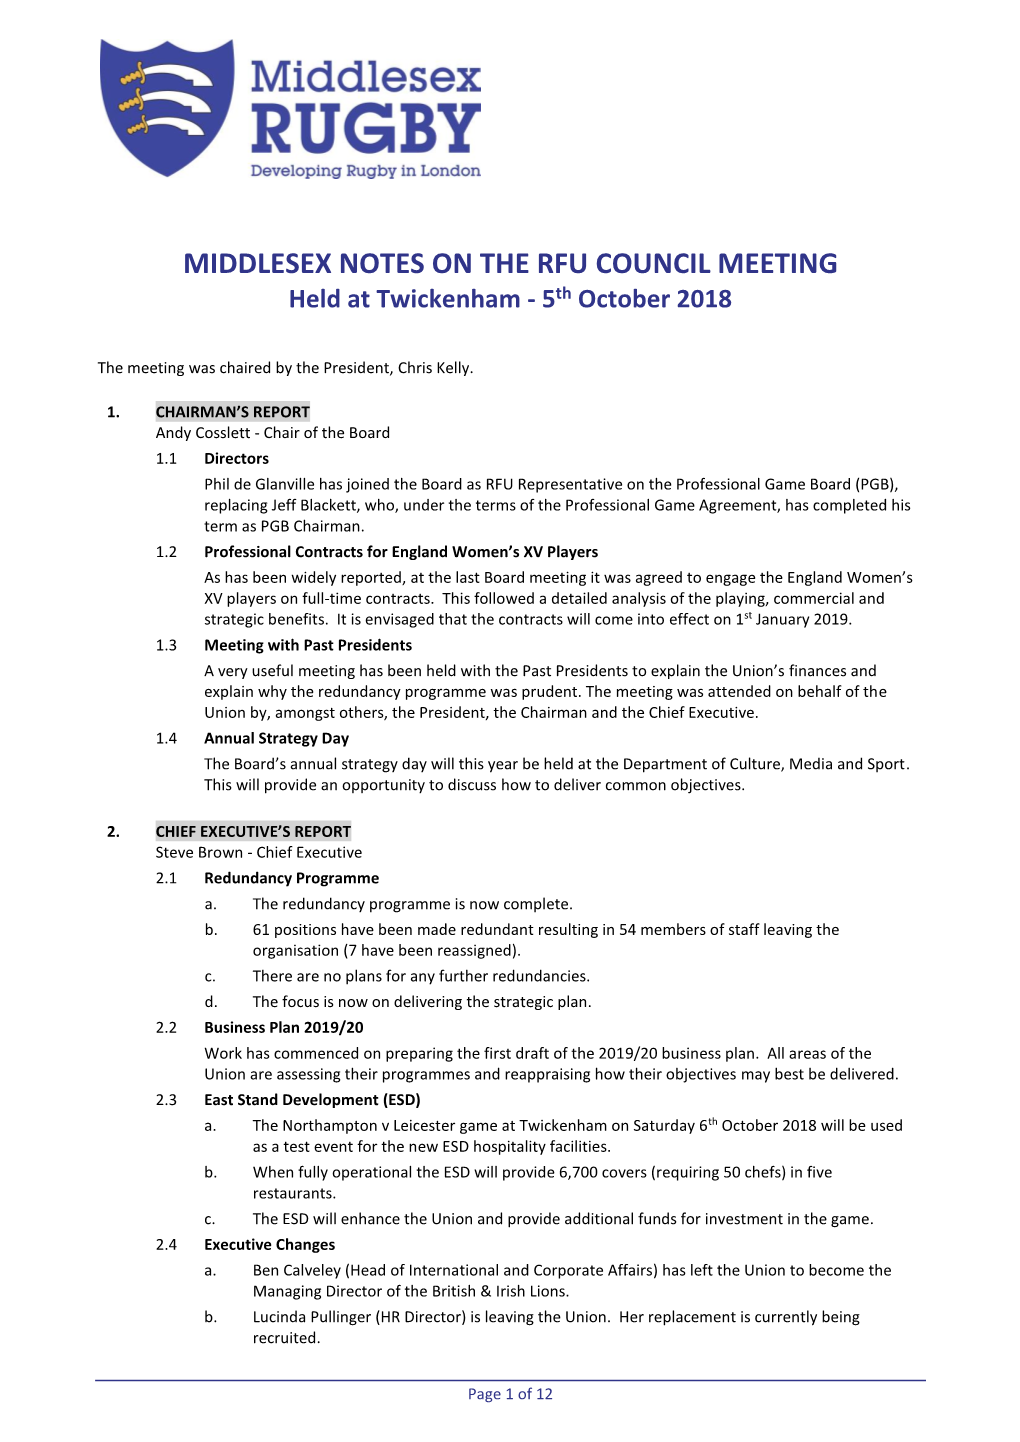 NOTES on the RFU COUNCIL MEETING Held at Twickenham - 5Th October 2018